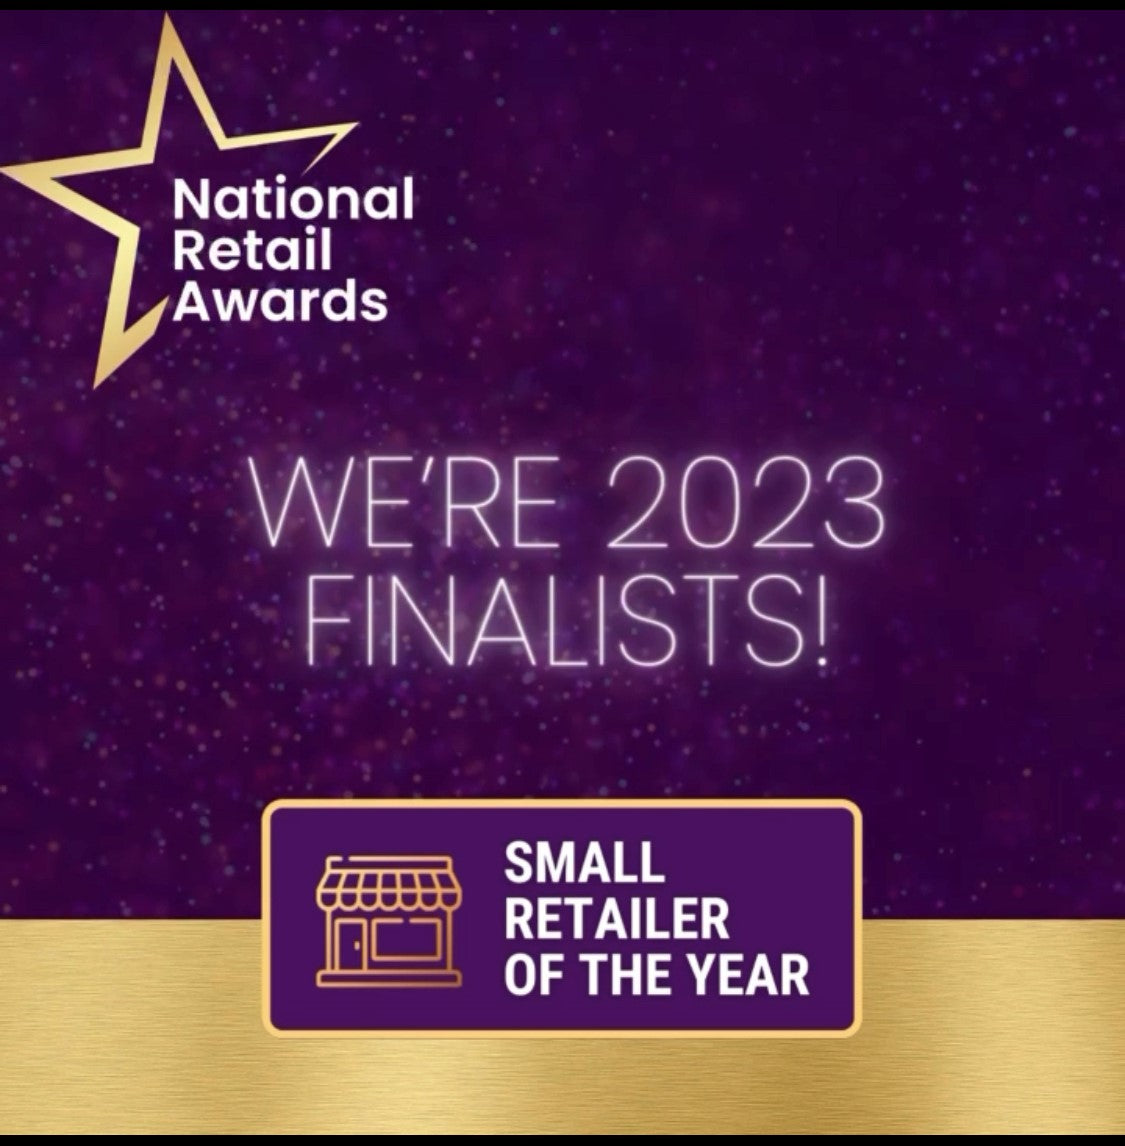 We are finalist in The National Retail Awards in 4 categories!!! Small Retailer of the Year 2023